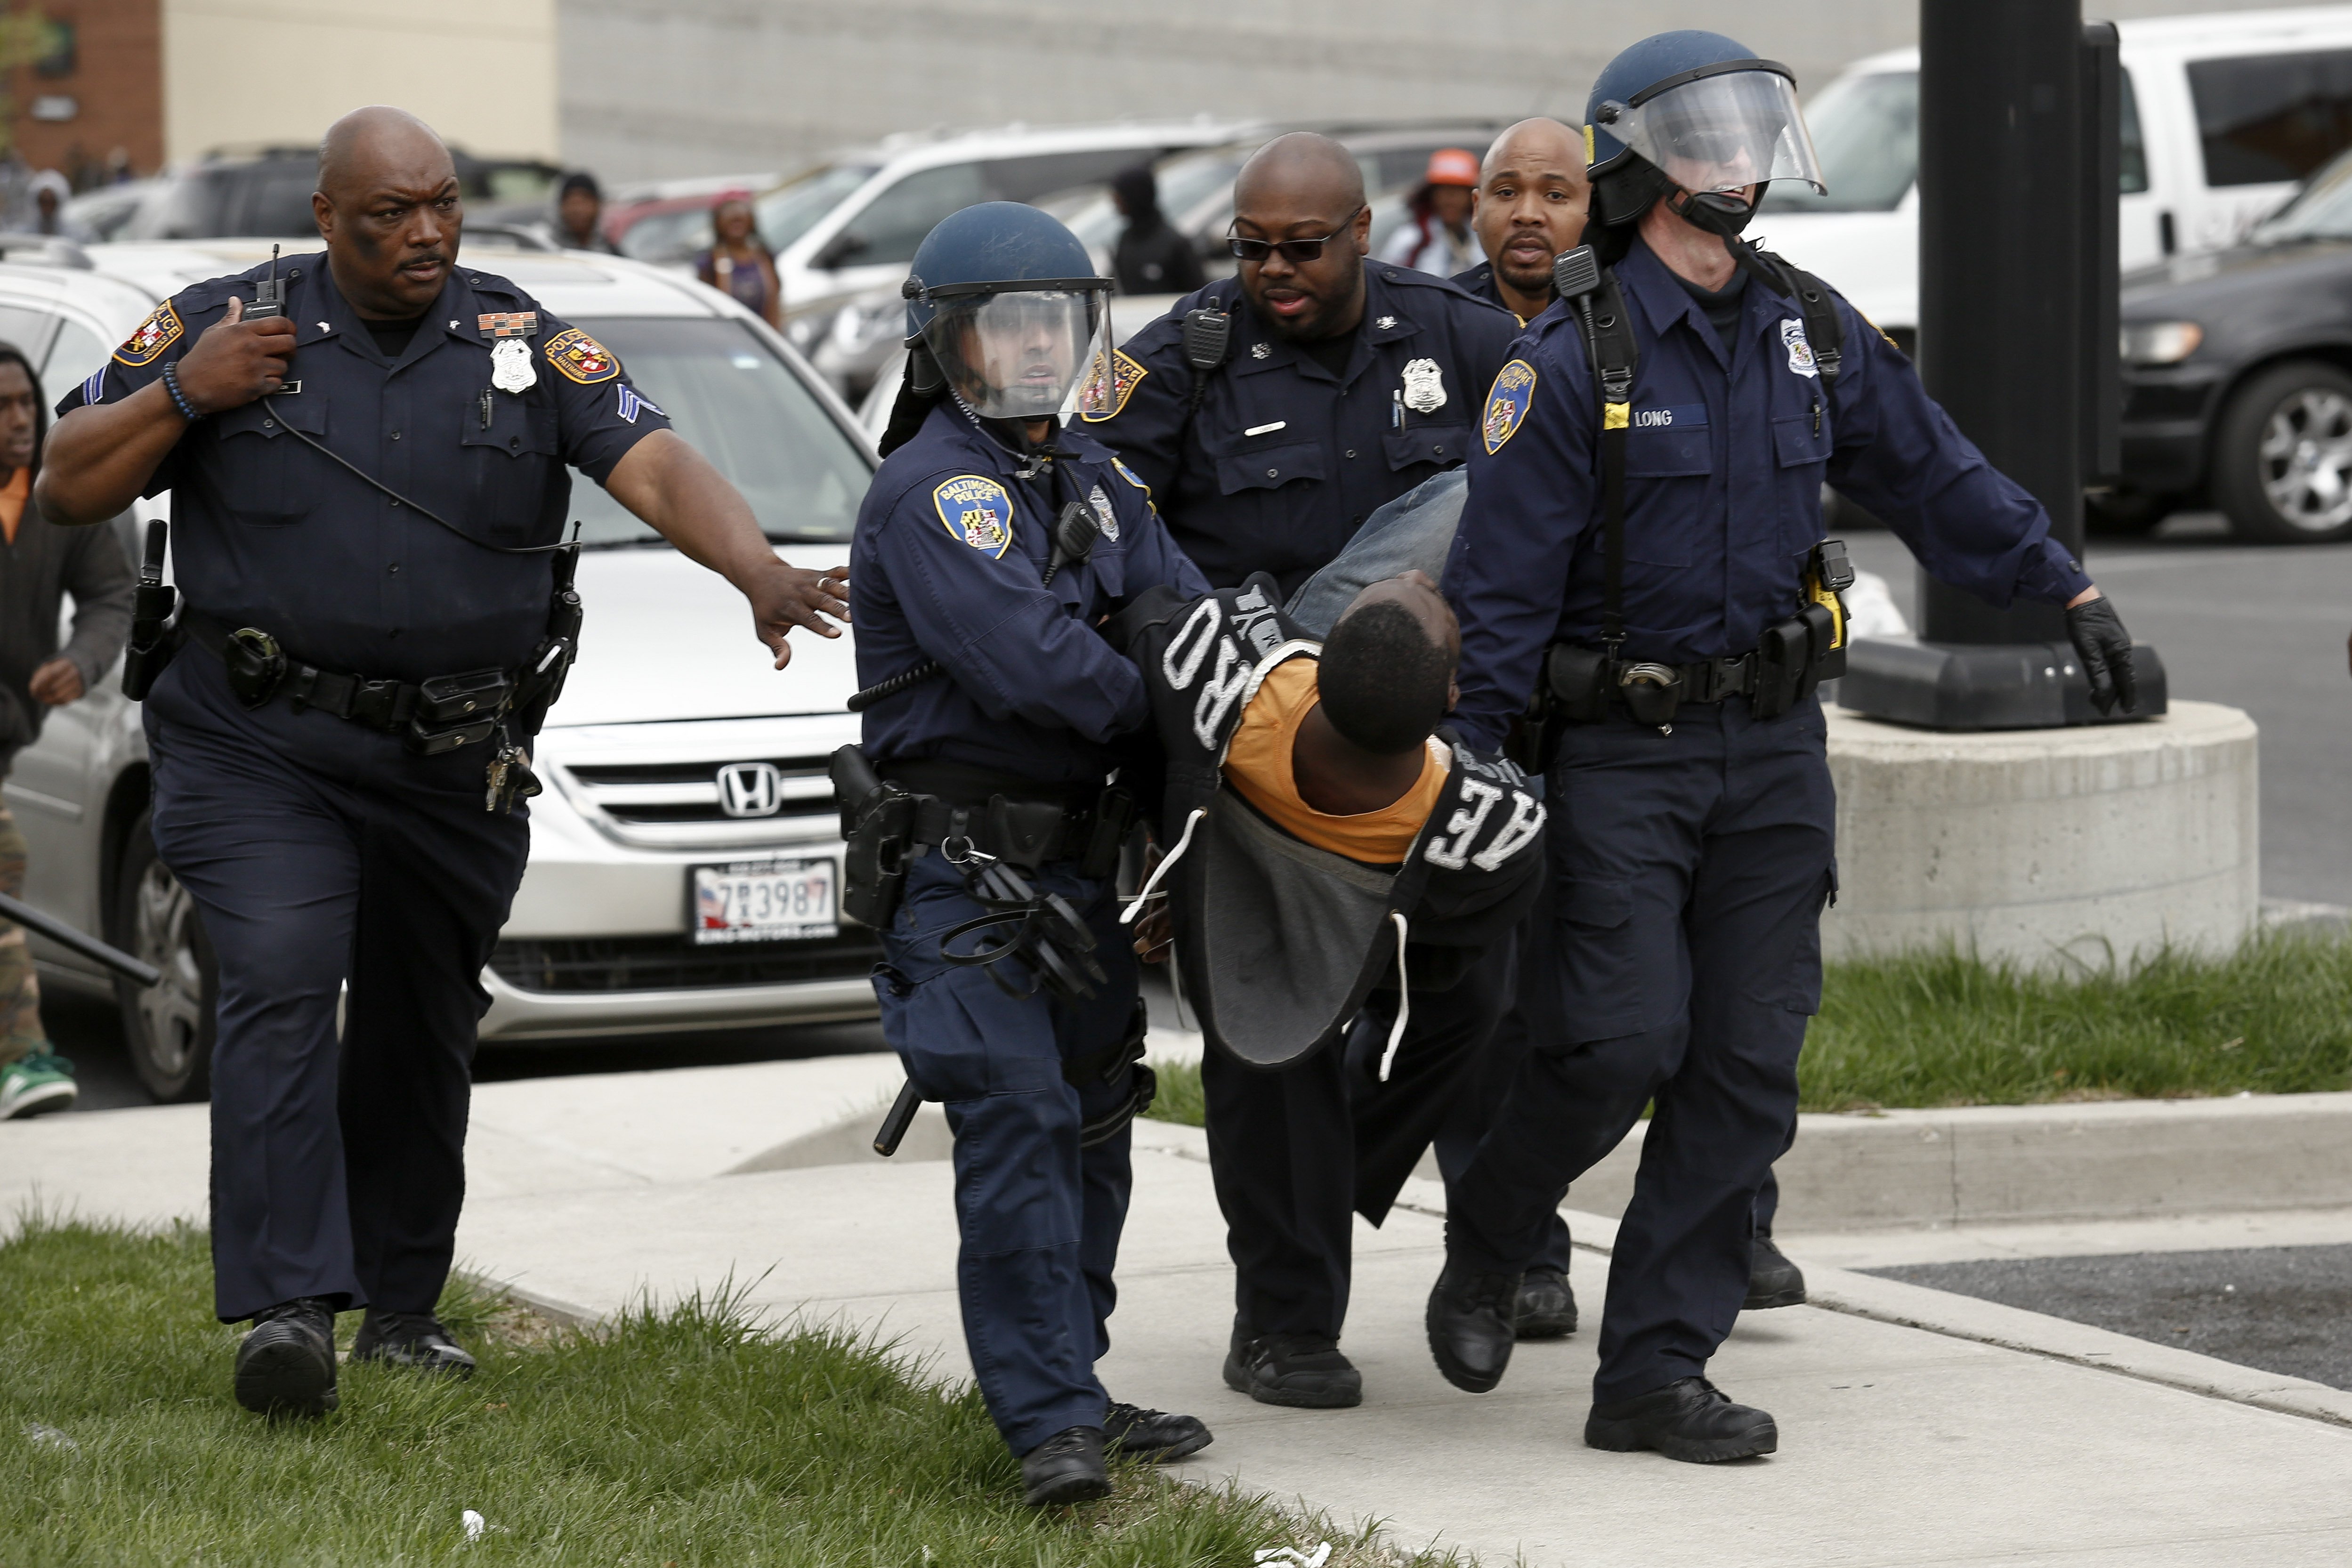 Police officers arrest a man near Mondawmin Mall in Baltimore on April 27, 2015.